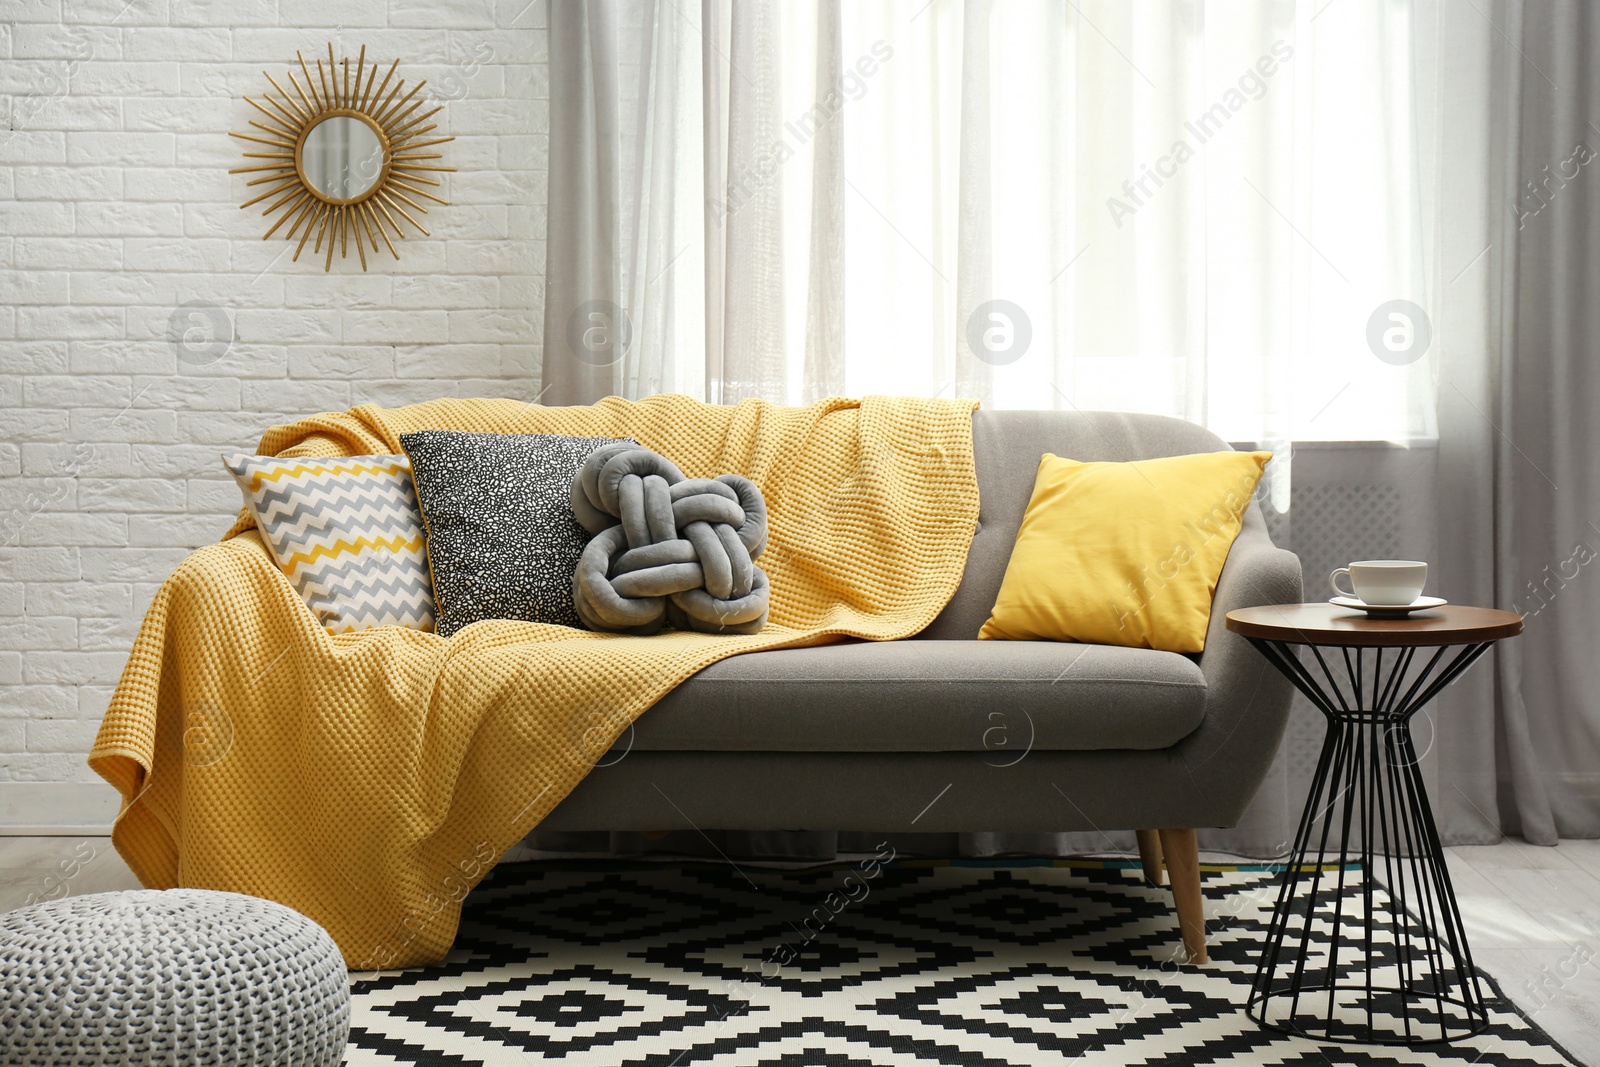 Photo of Stylish living room interior with soft pillows and yellow plaid on sofa